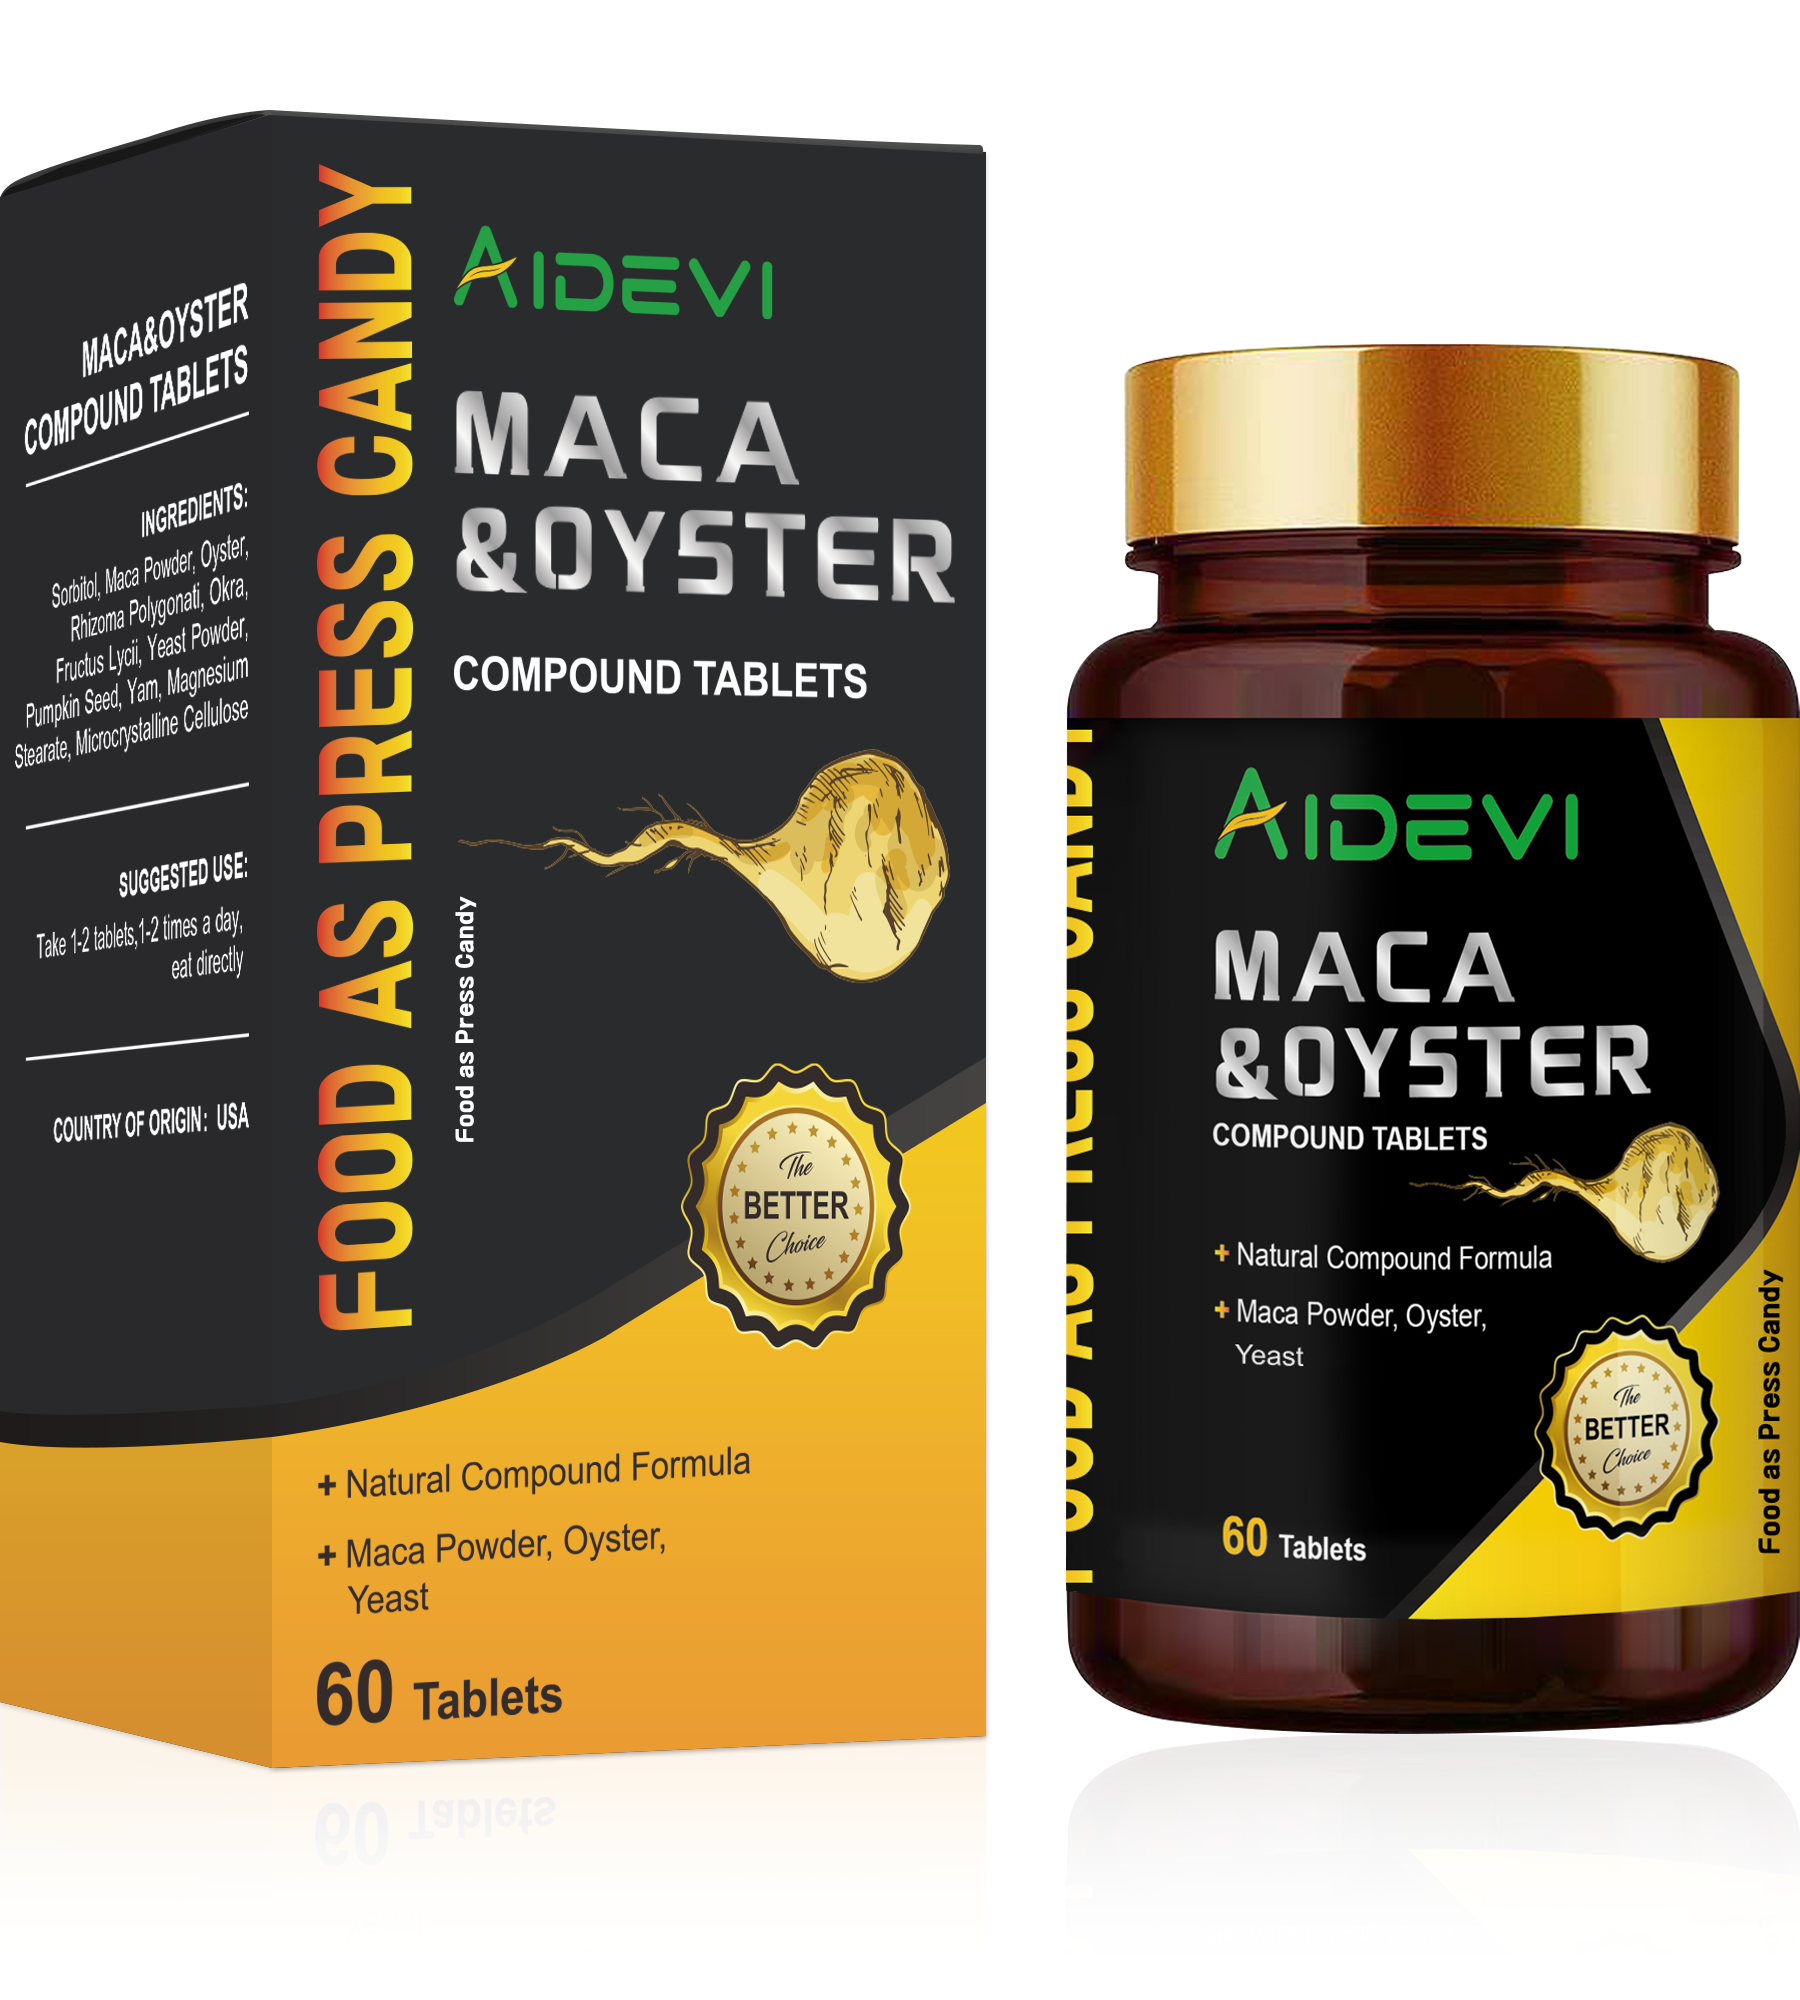 Maca Oyster For Sale Online,Aidevi Maca Oyster